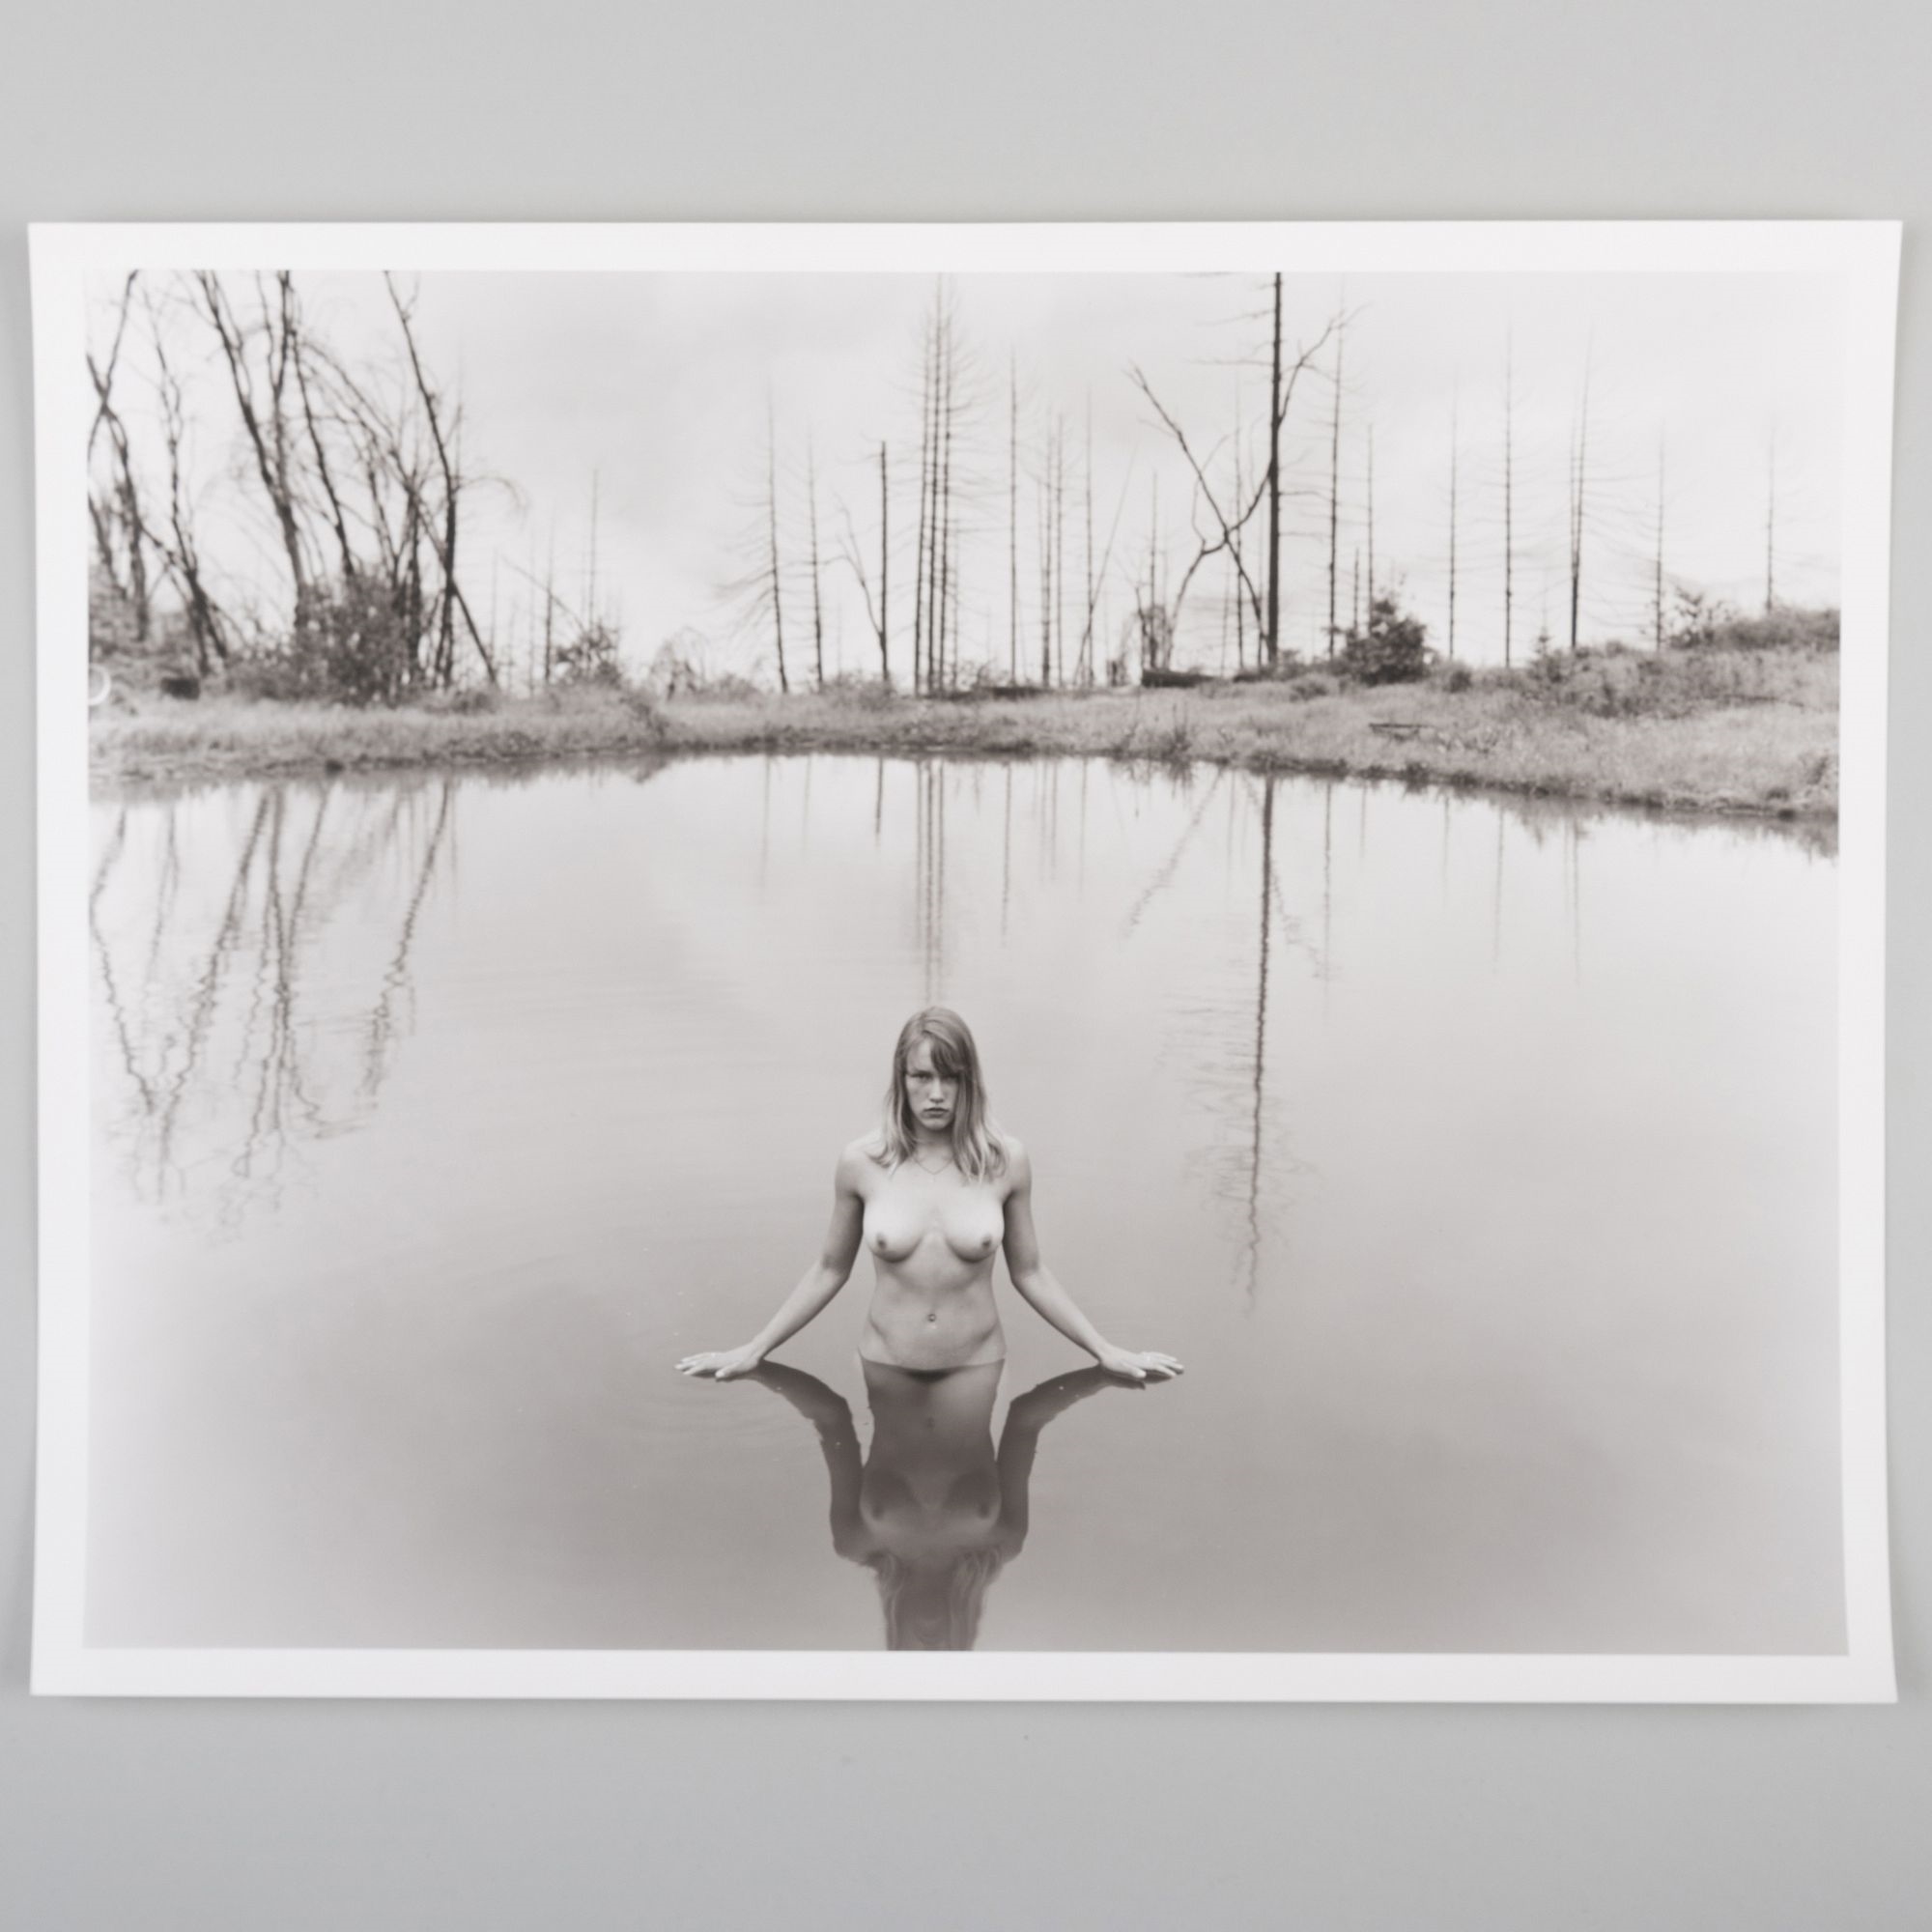 Artwork by Jock Sturges, A Group of Twelve Photographs, Made of black and white photographs